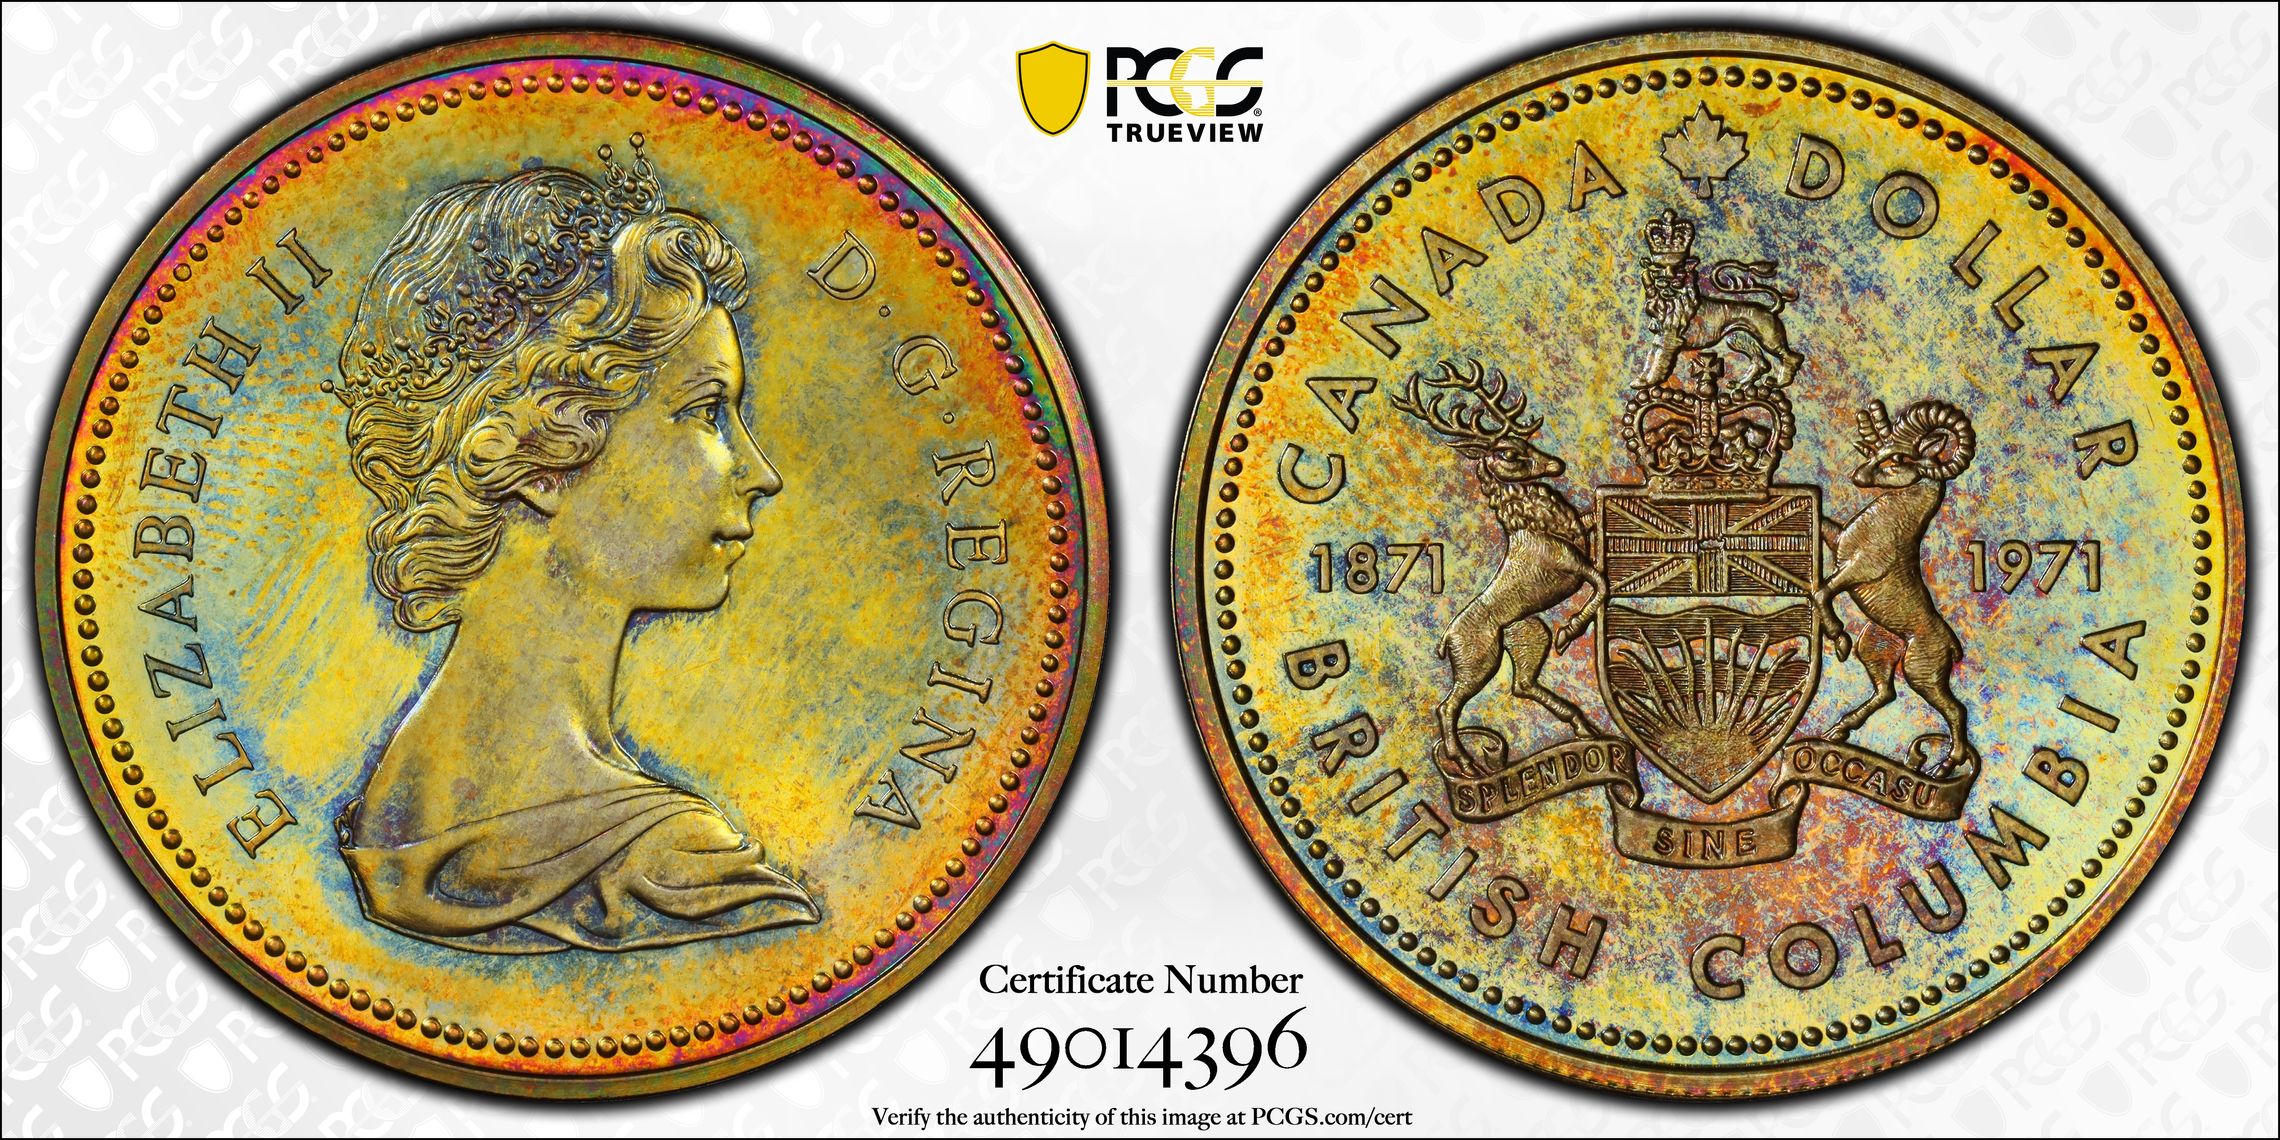 C229 Nicely toned 1971 Canada PCGS SP67 BC Commem silver Dollar.